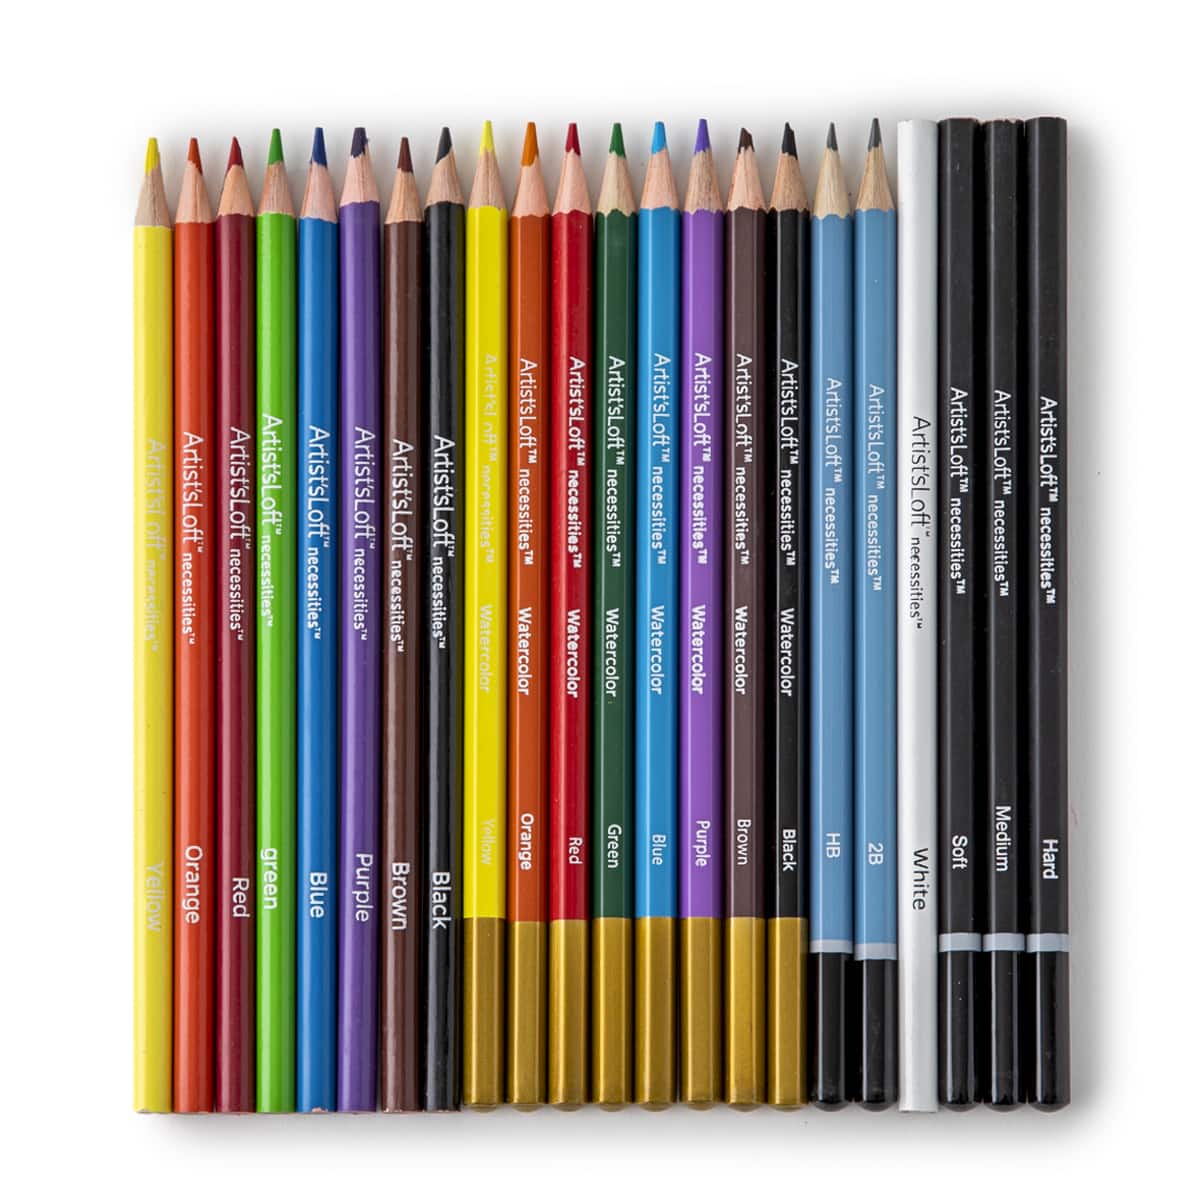 Buy Drawing Pencils For Sketching & Illustrations